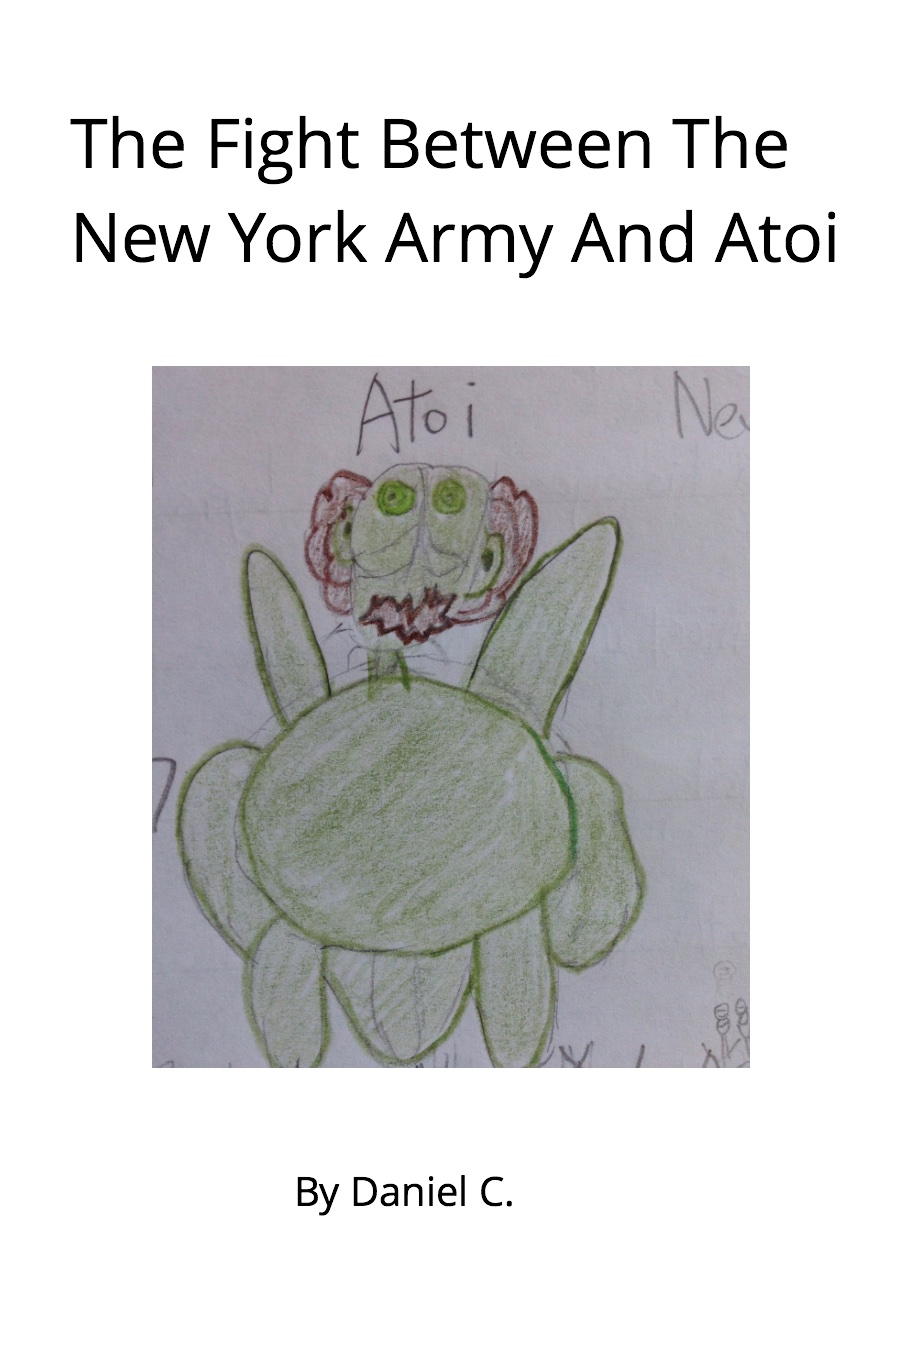 The Fight Between the New York Army and Atoi by Daniel C